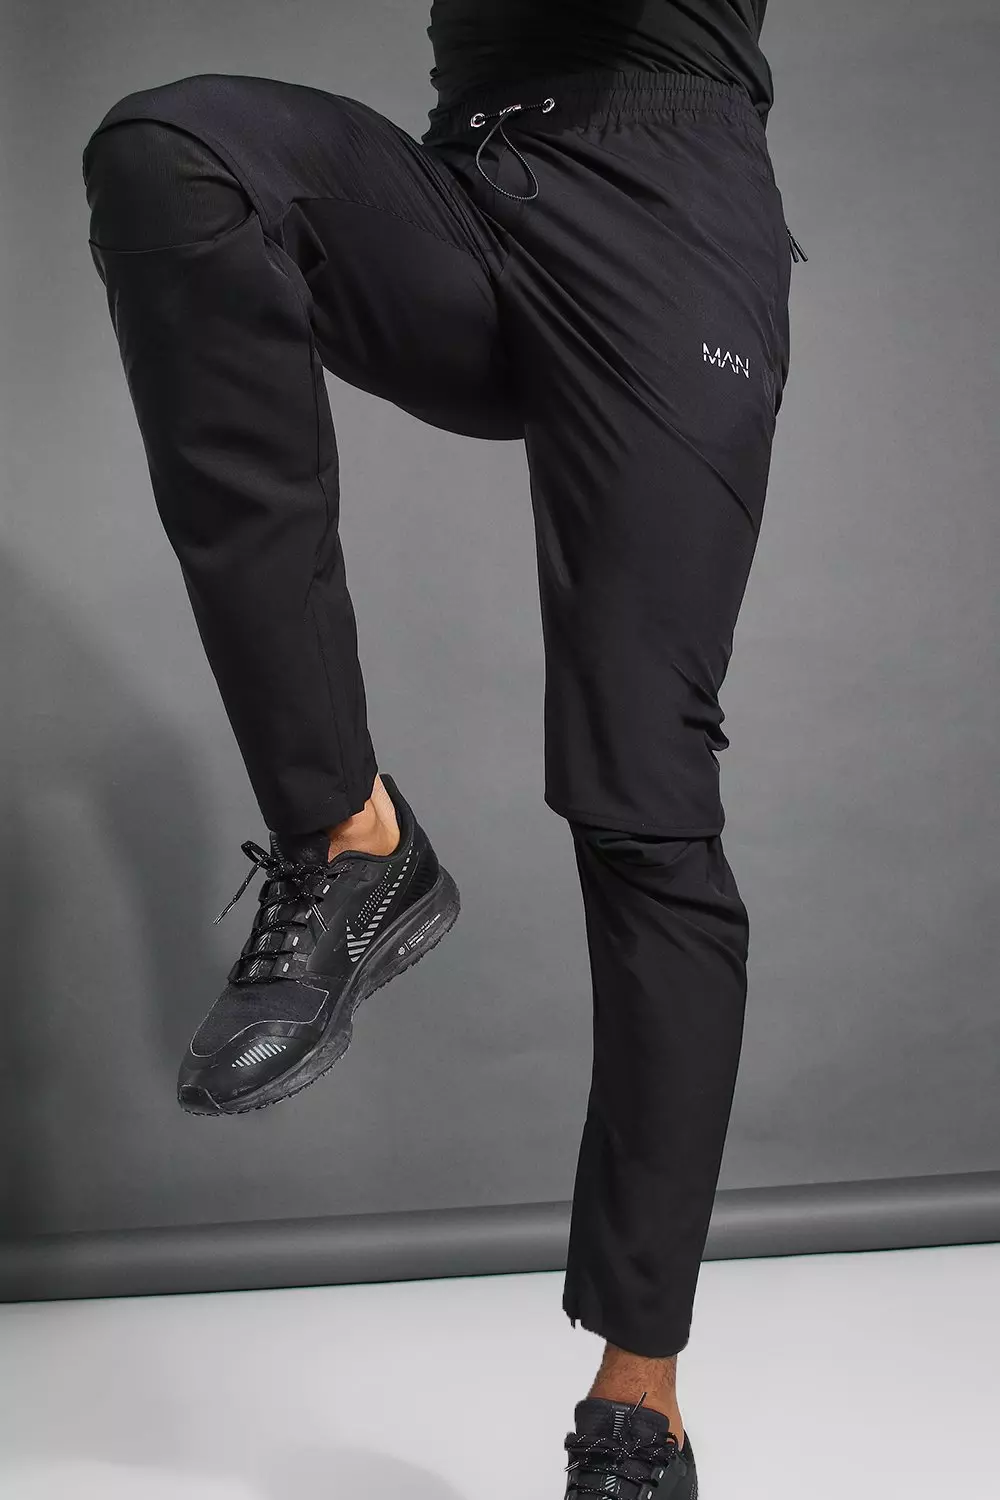 Man Active Gym Tapered Fit Sweatpants | boohooMAN USA